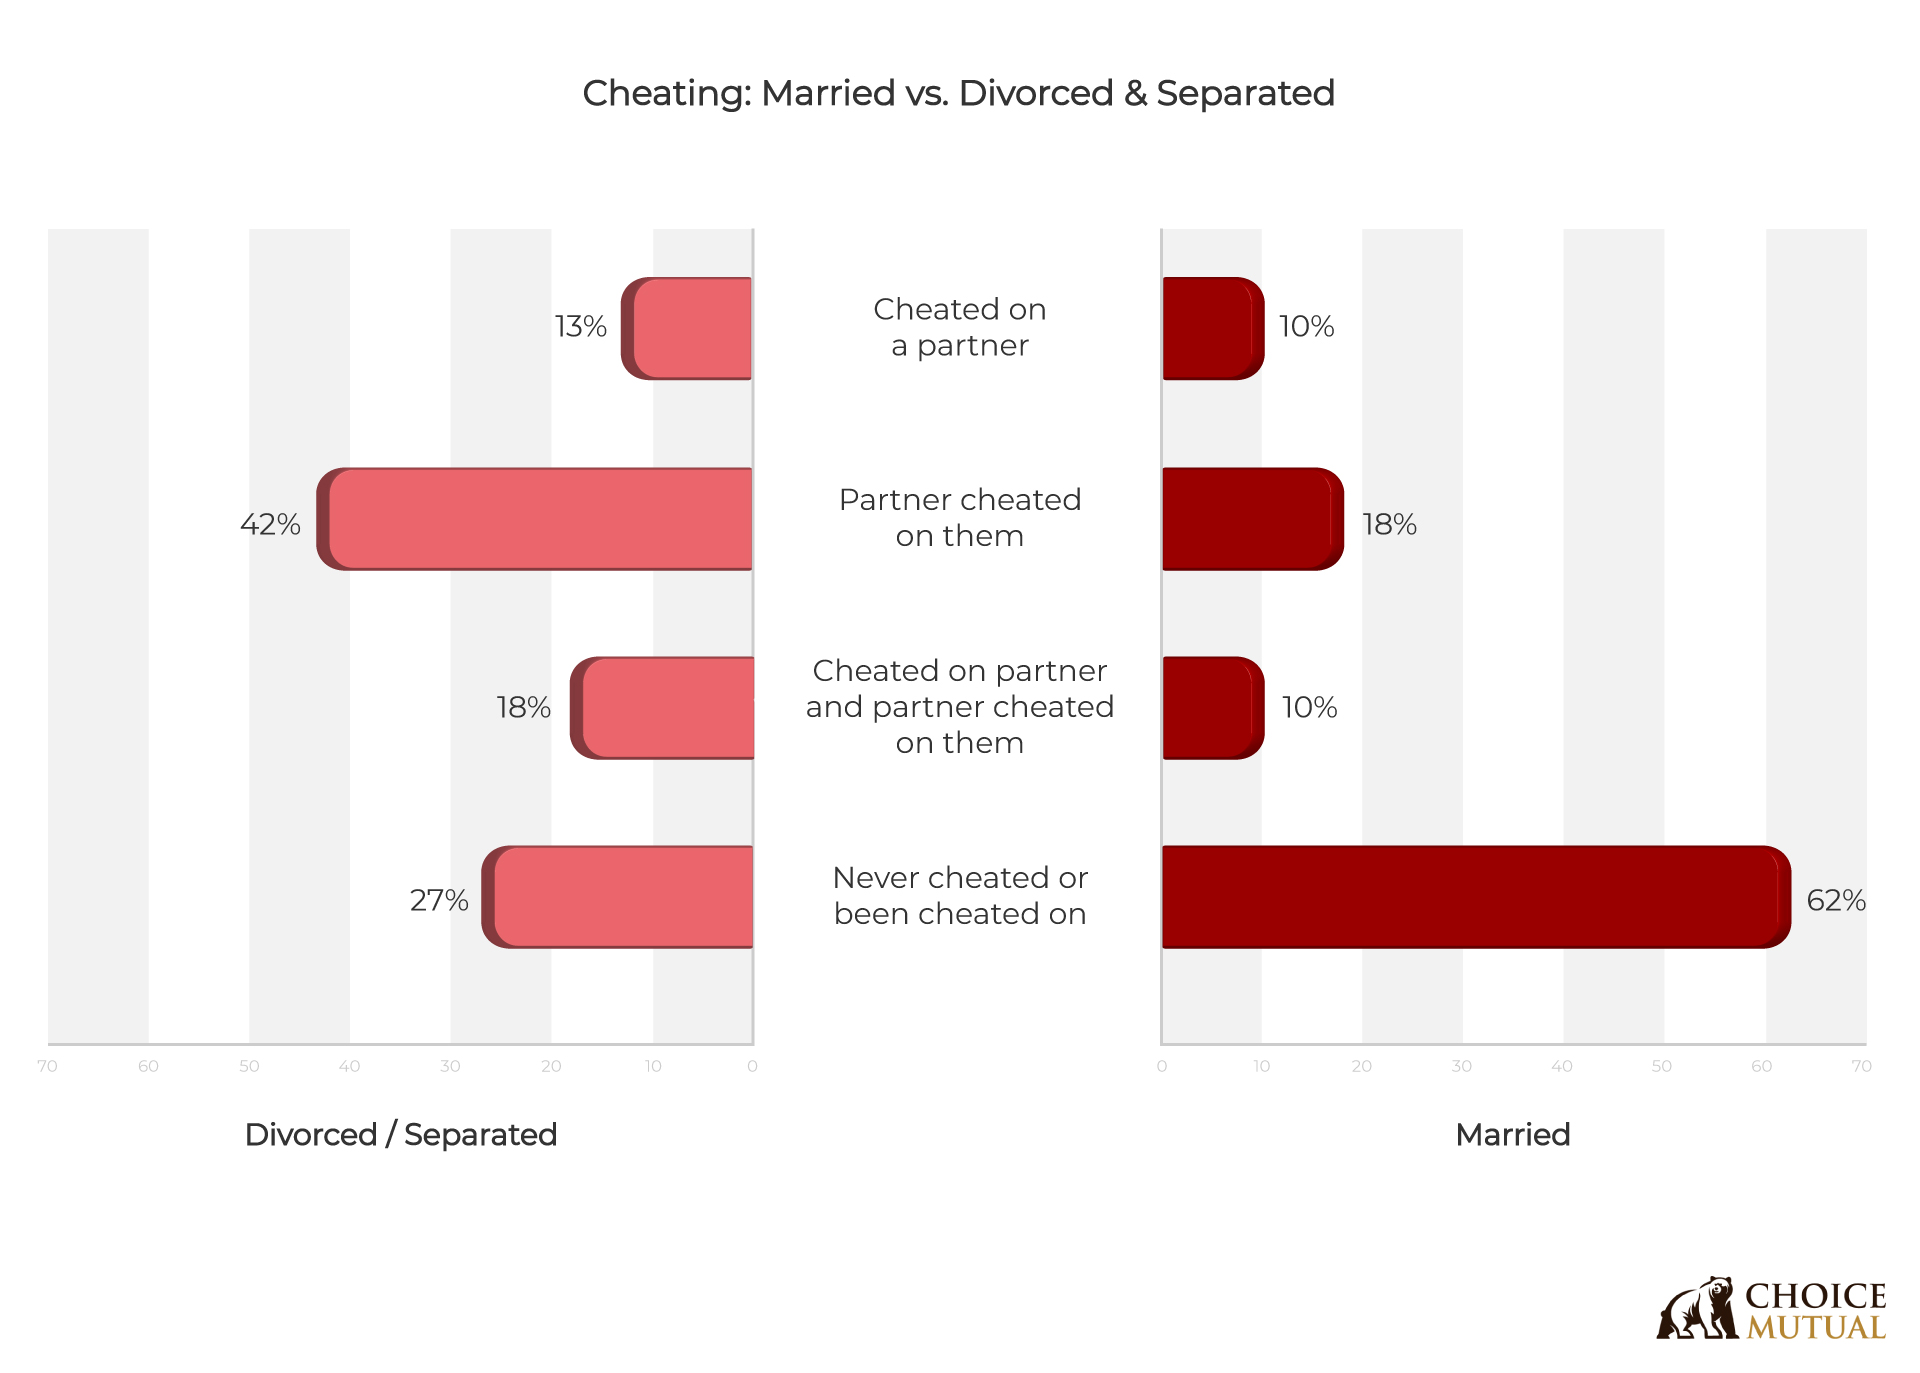 A chart comparing the rates of cheating for married and divorced seniors